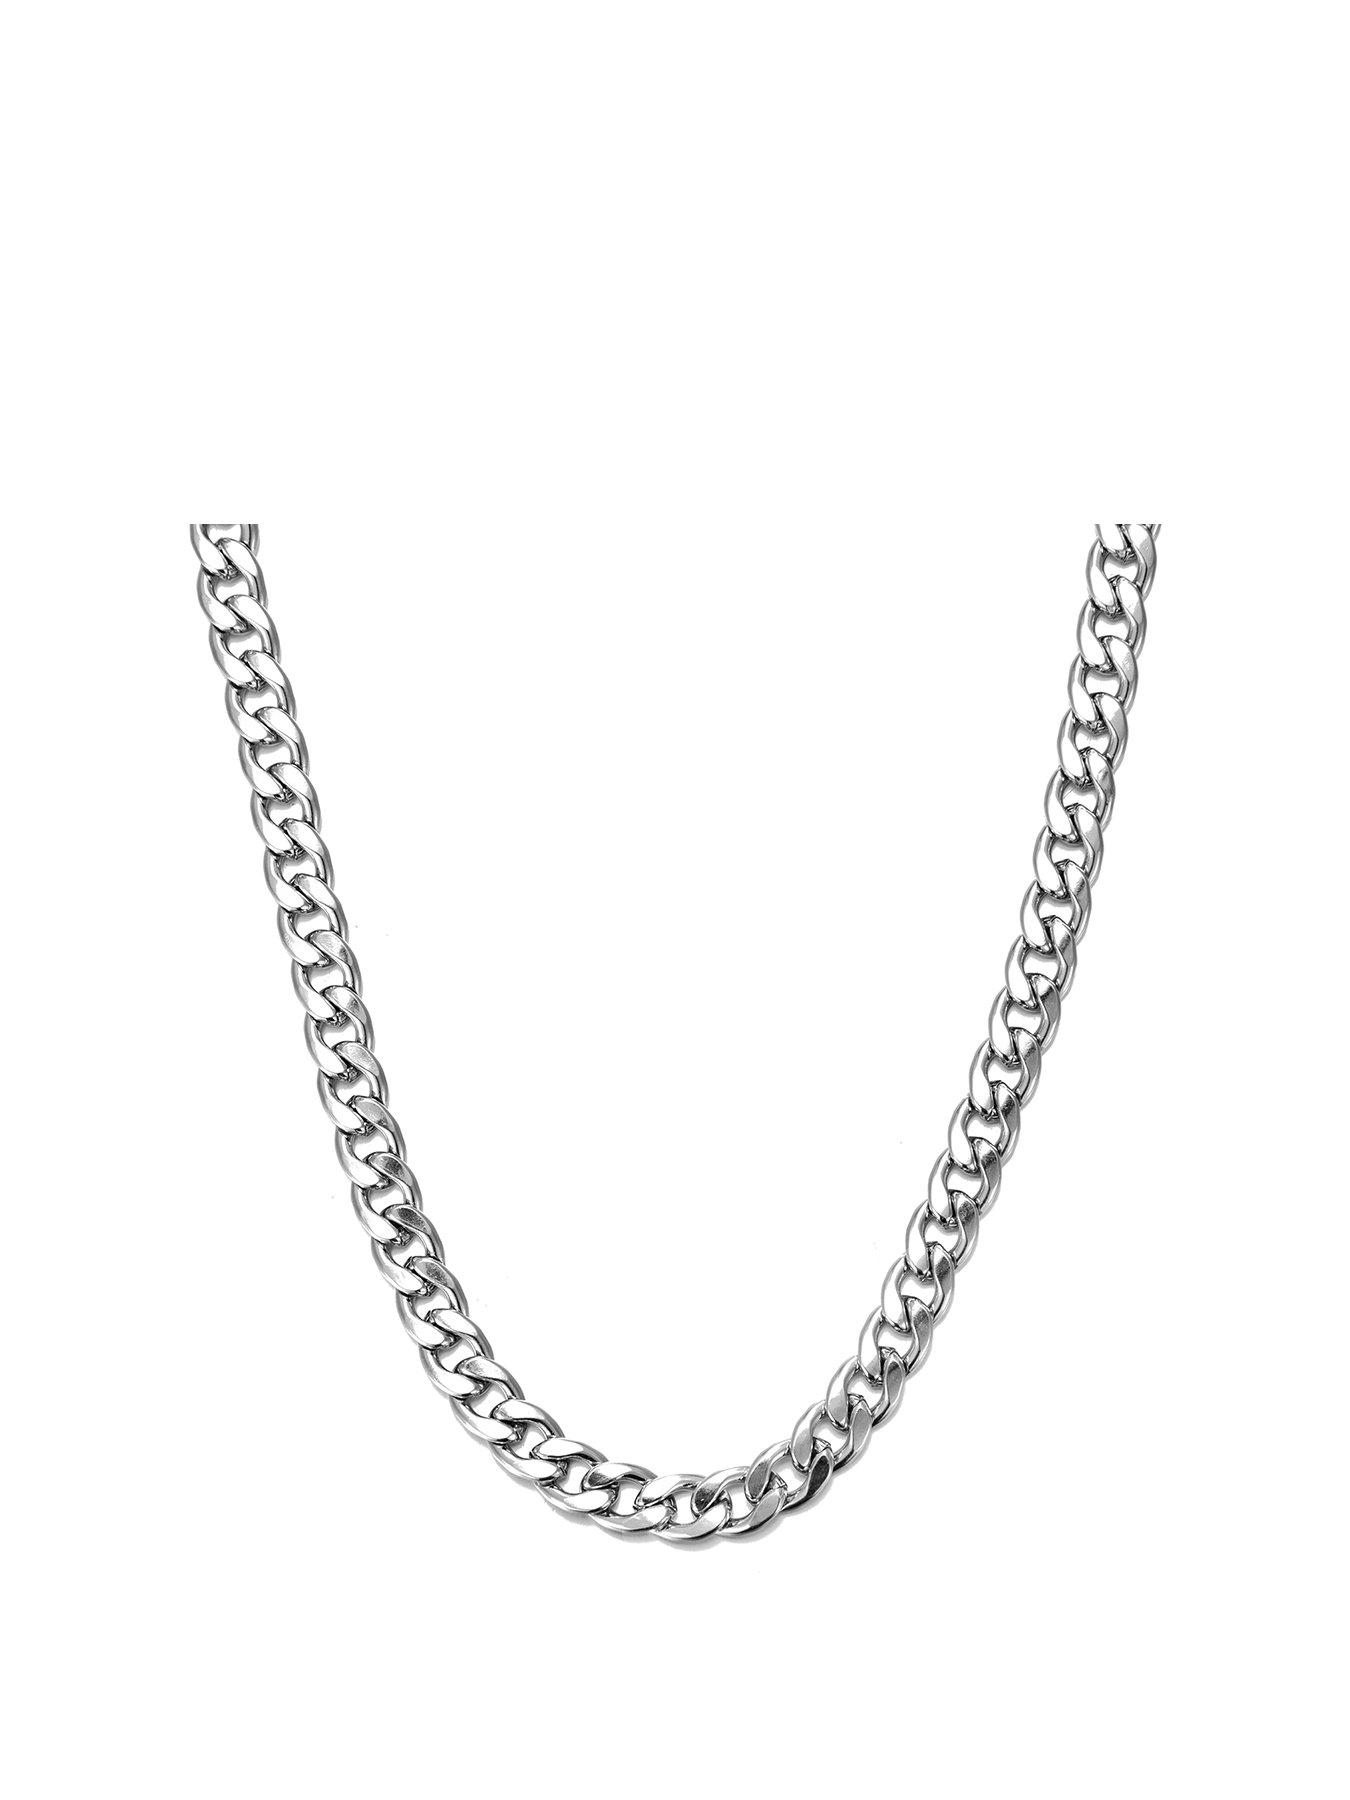 Double Accent 9mm Stainless Steel Chain Necklace Curb Chain Necklace  (Available Length 20,24,30)